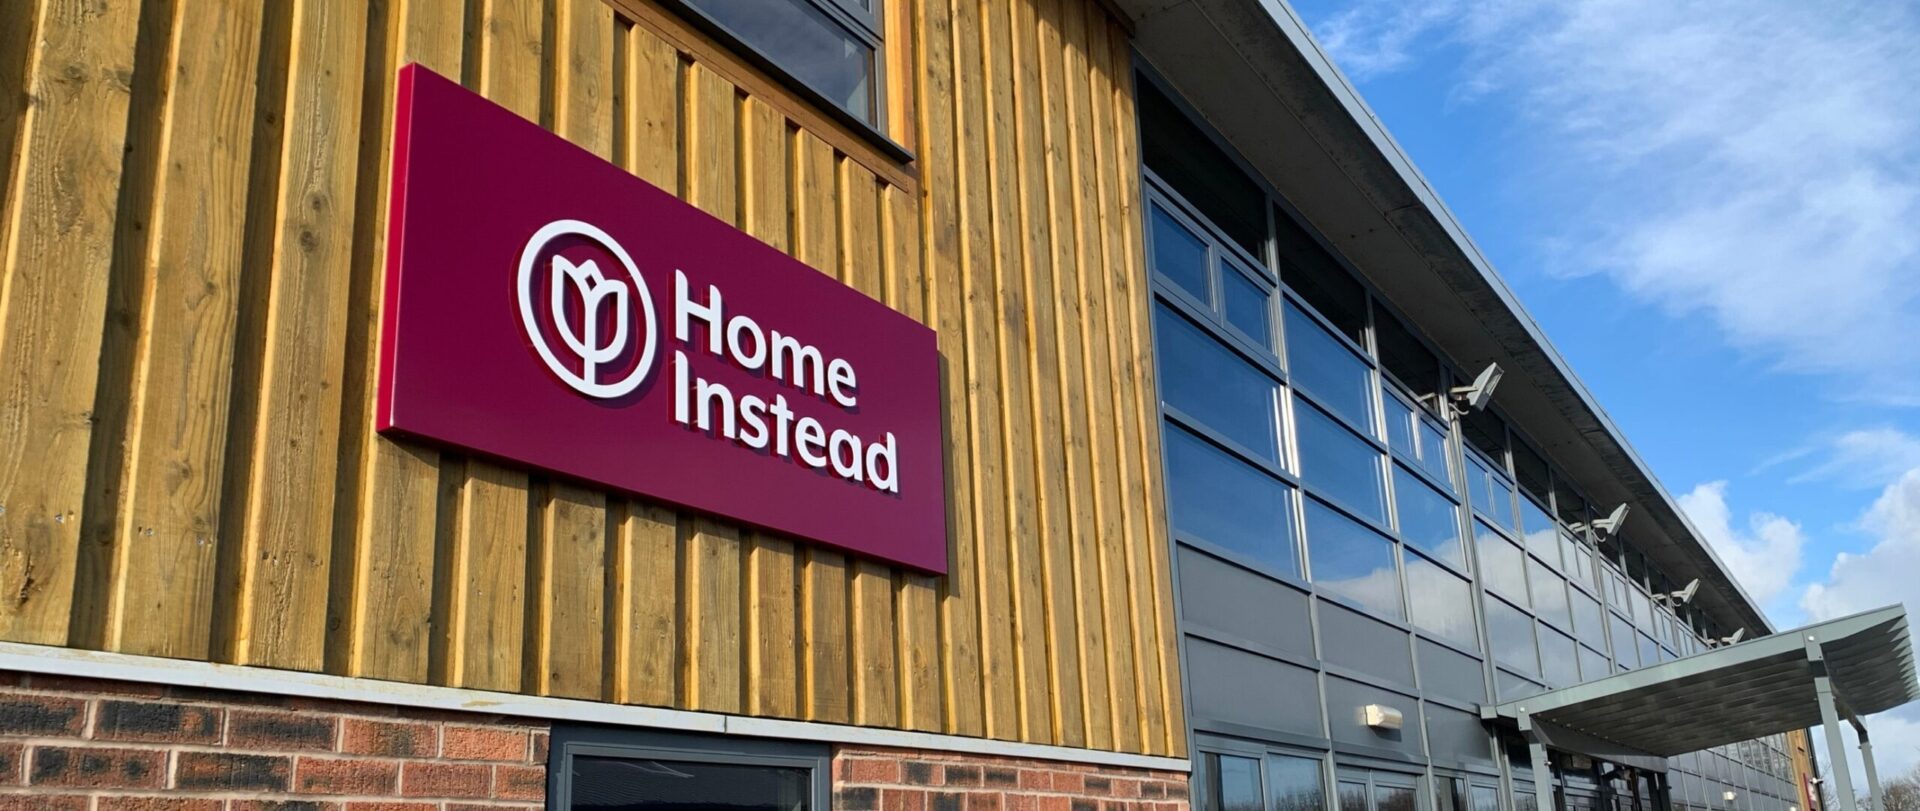 Home Instead launches new brand identity